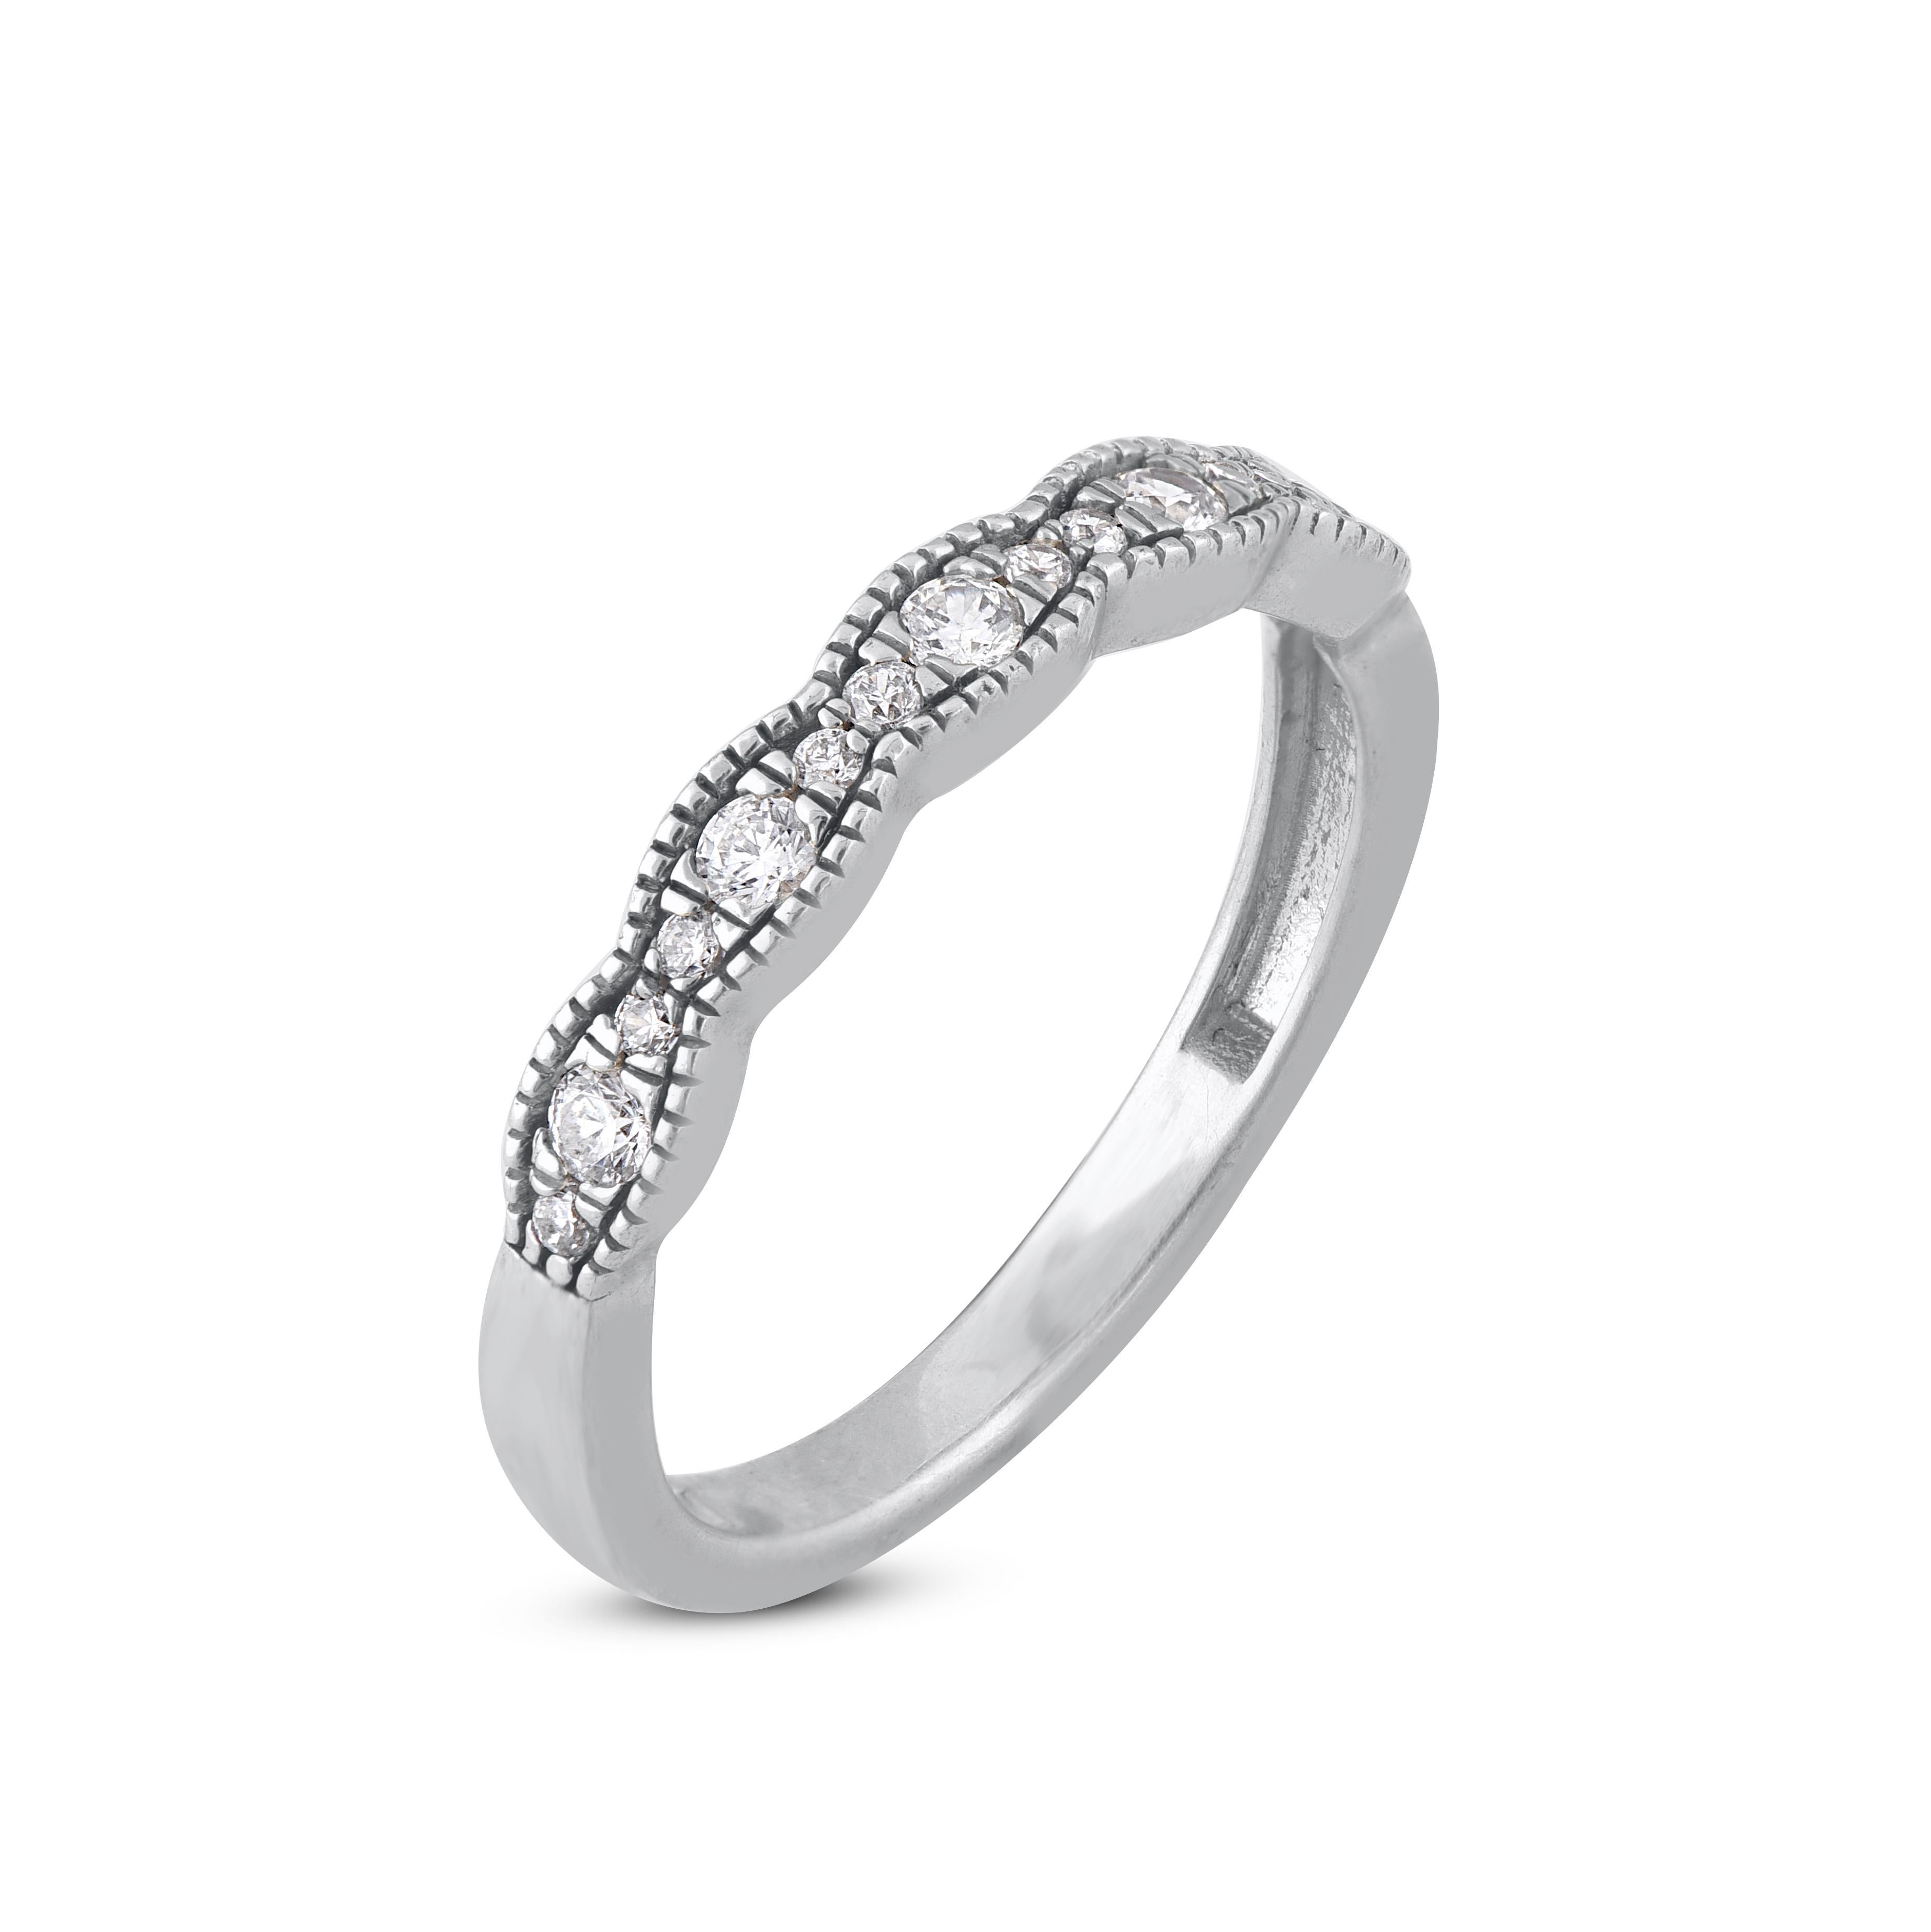 Celebrate your years together with this elegant scalloped diamond band. These band ring are studded with 15 brilliant cut natural diamonds in 14 karat white gold in prong setting. Total diamond weight is 0.25 carat. The white diamonds are graded as